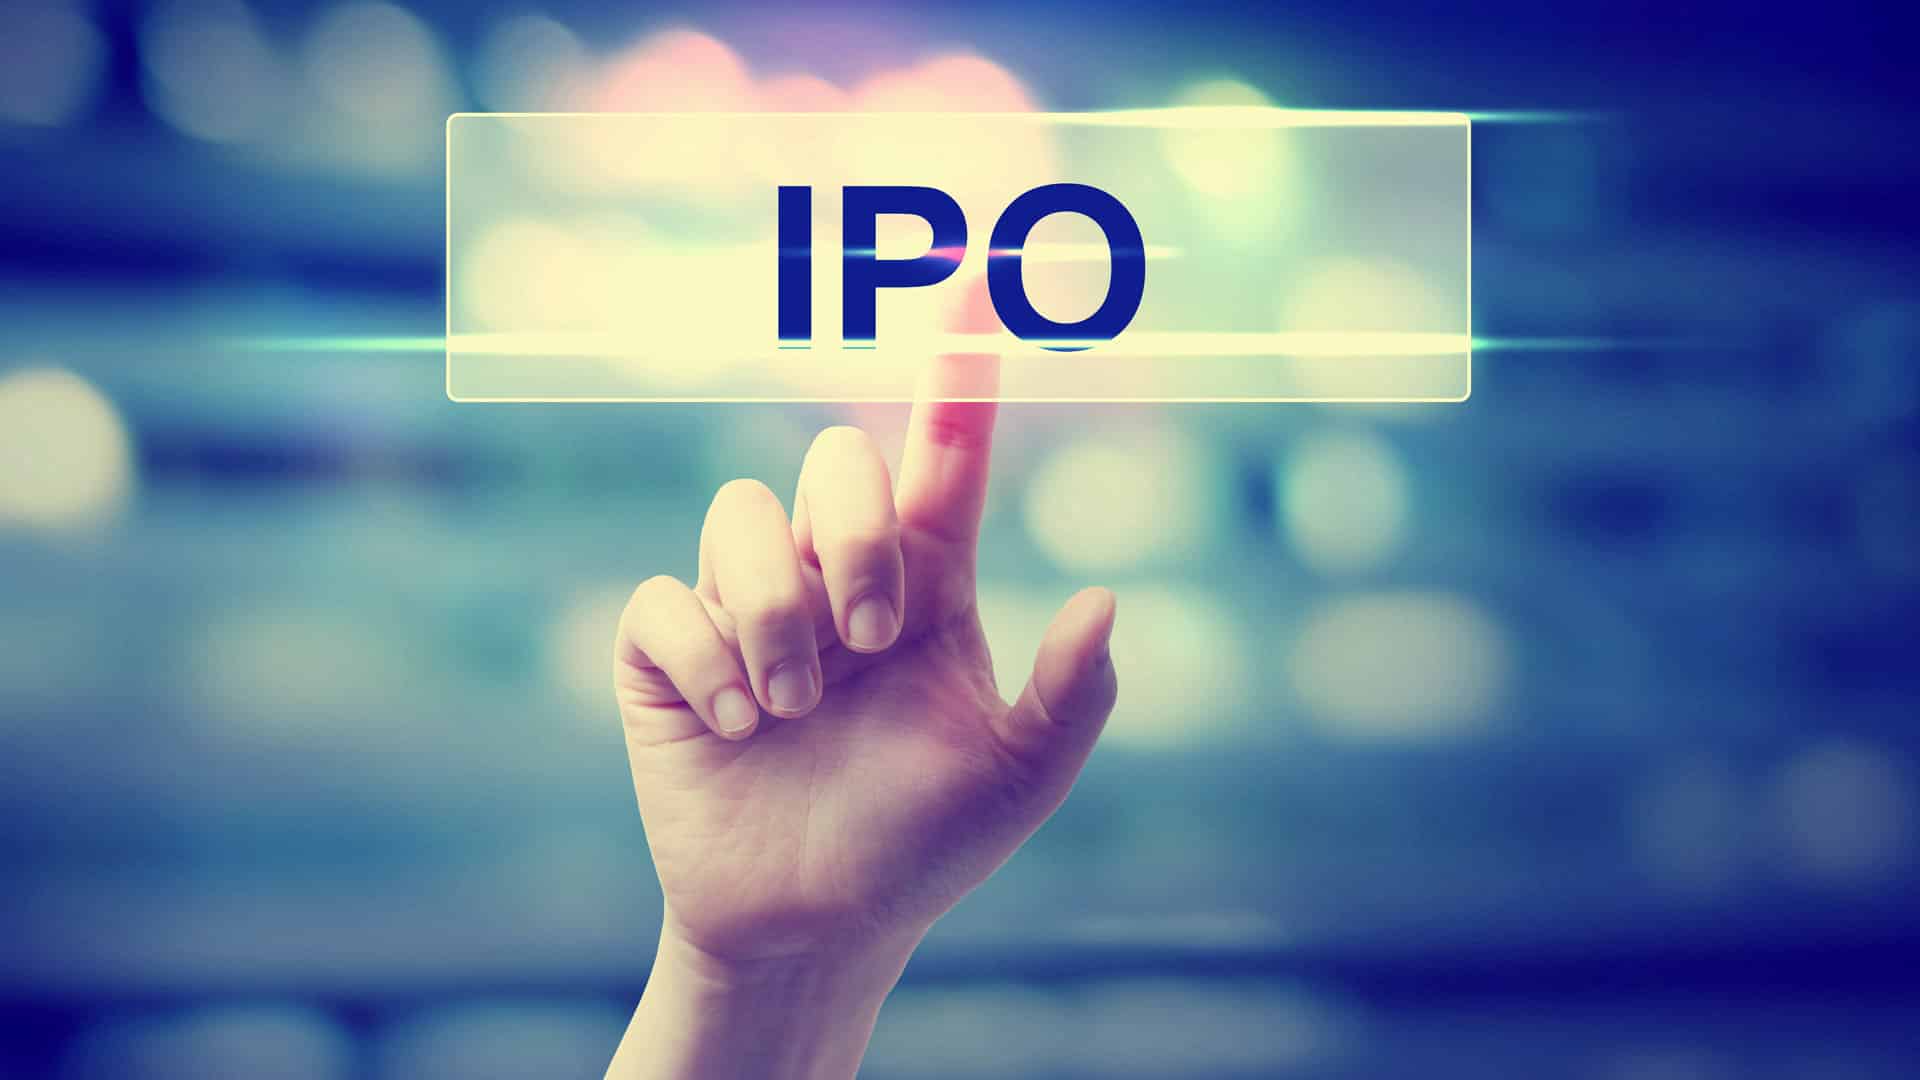 Tata Technologies files preliminary papers to raise funds via IPO